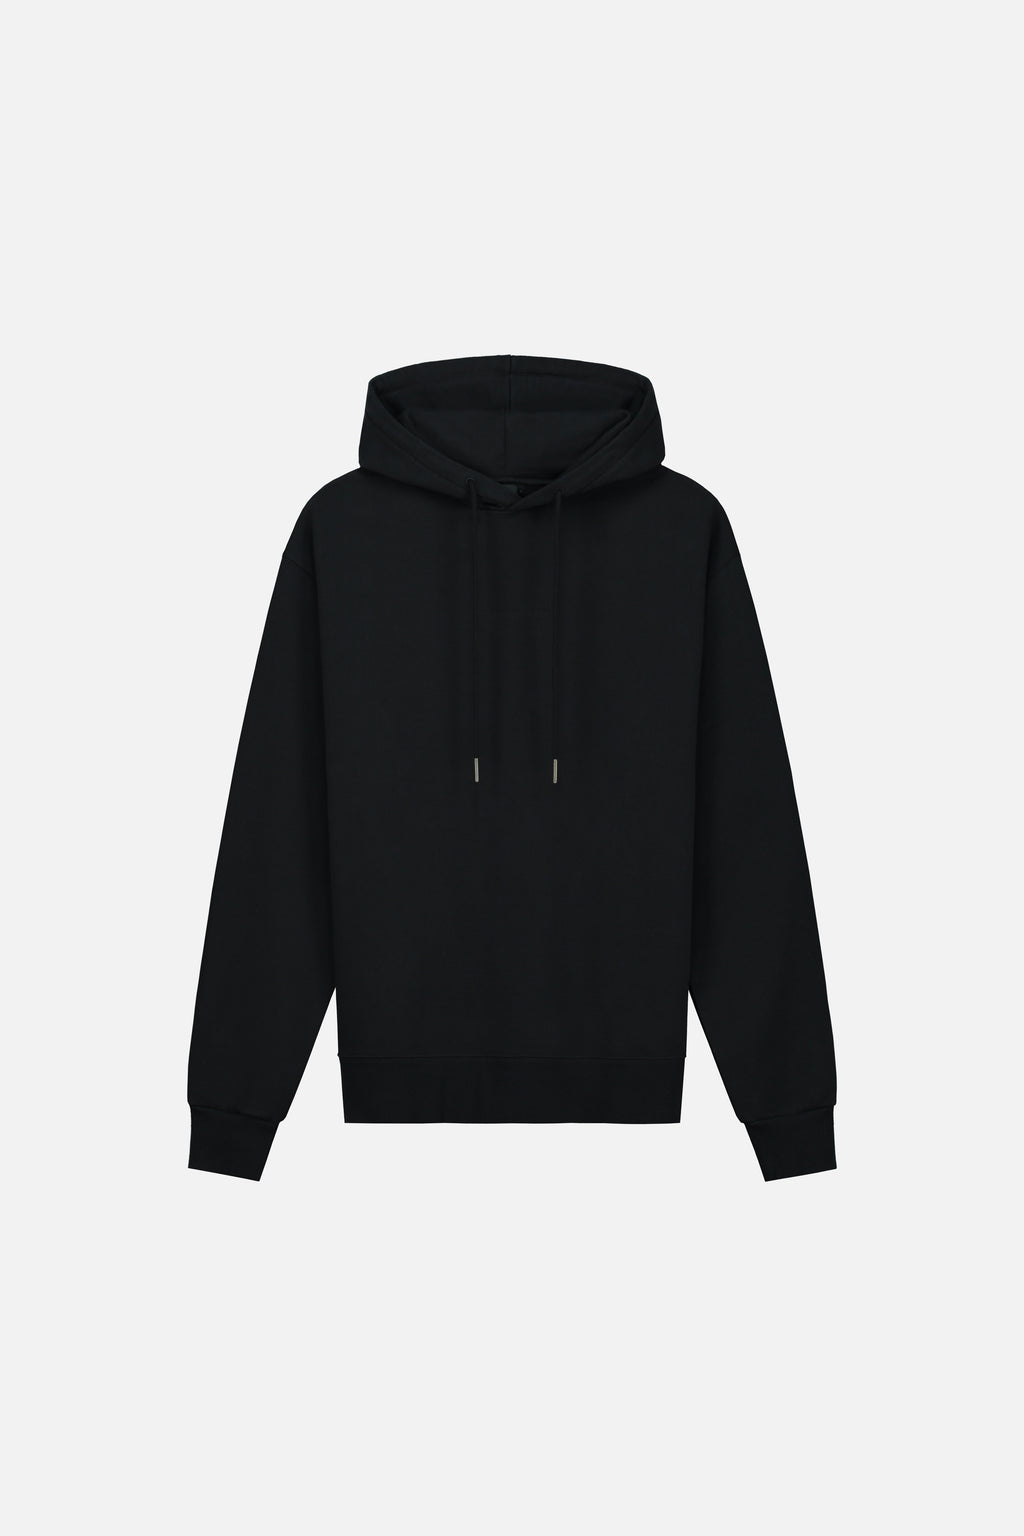 LIFE EVENT HOODIE – Tomorrowland Store